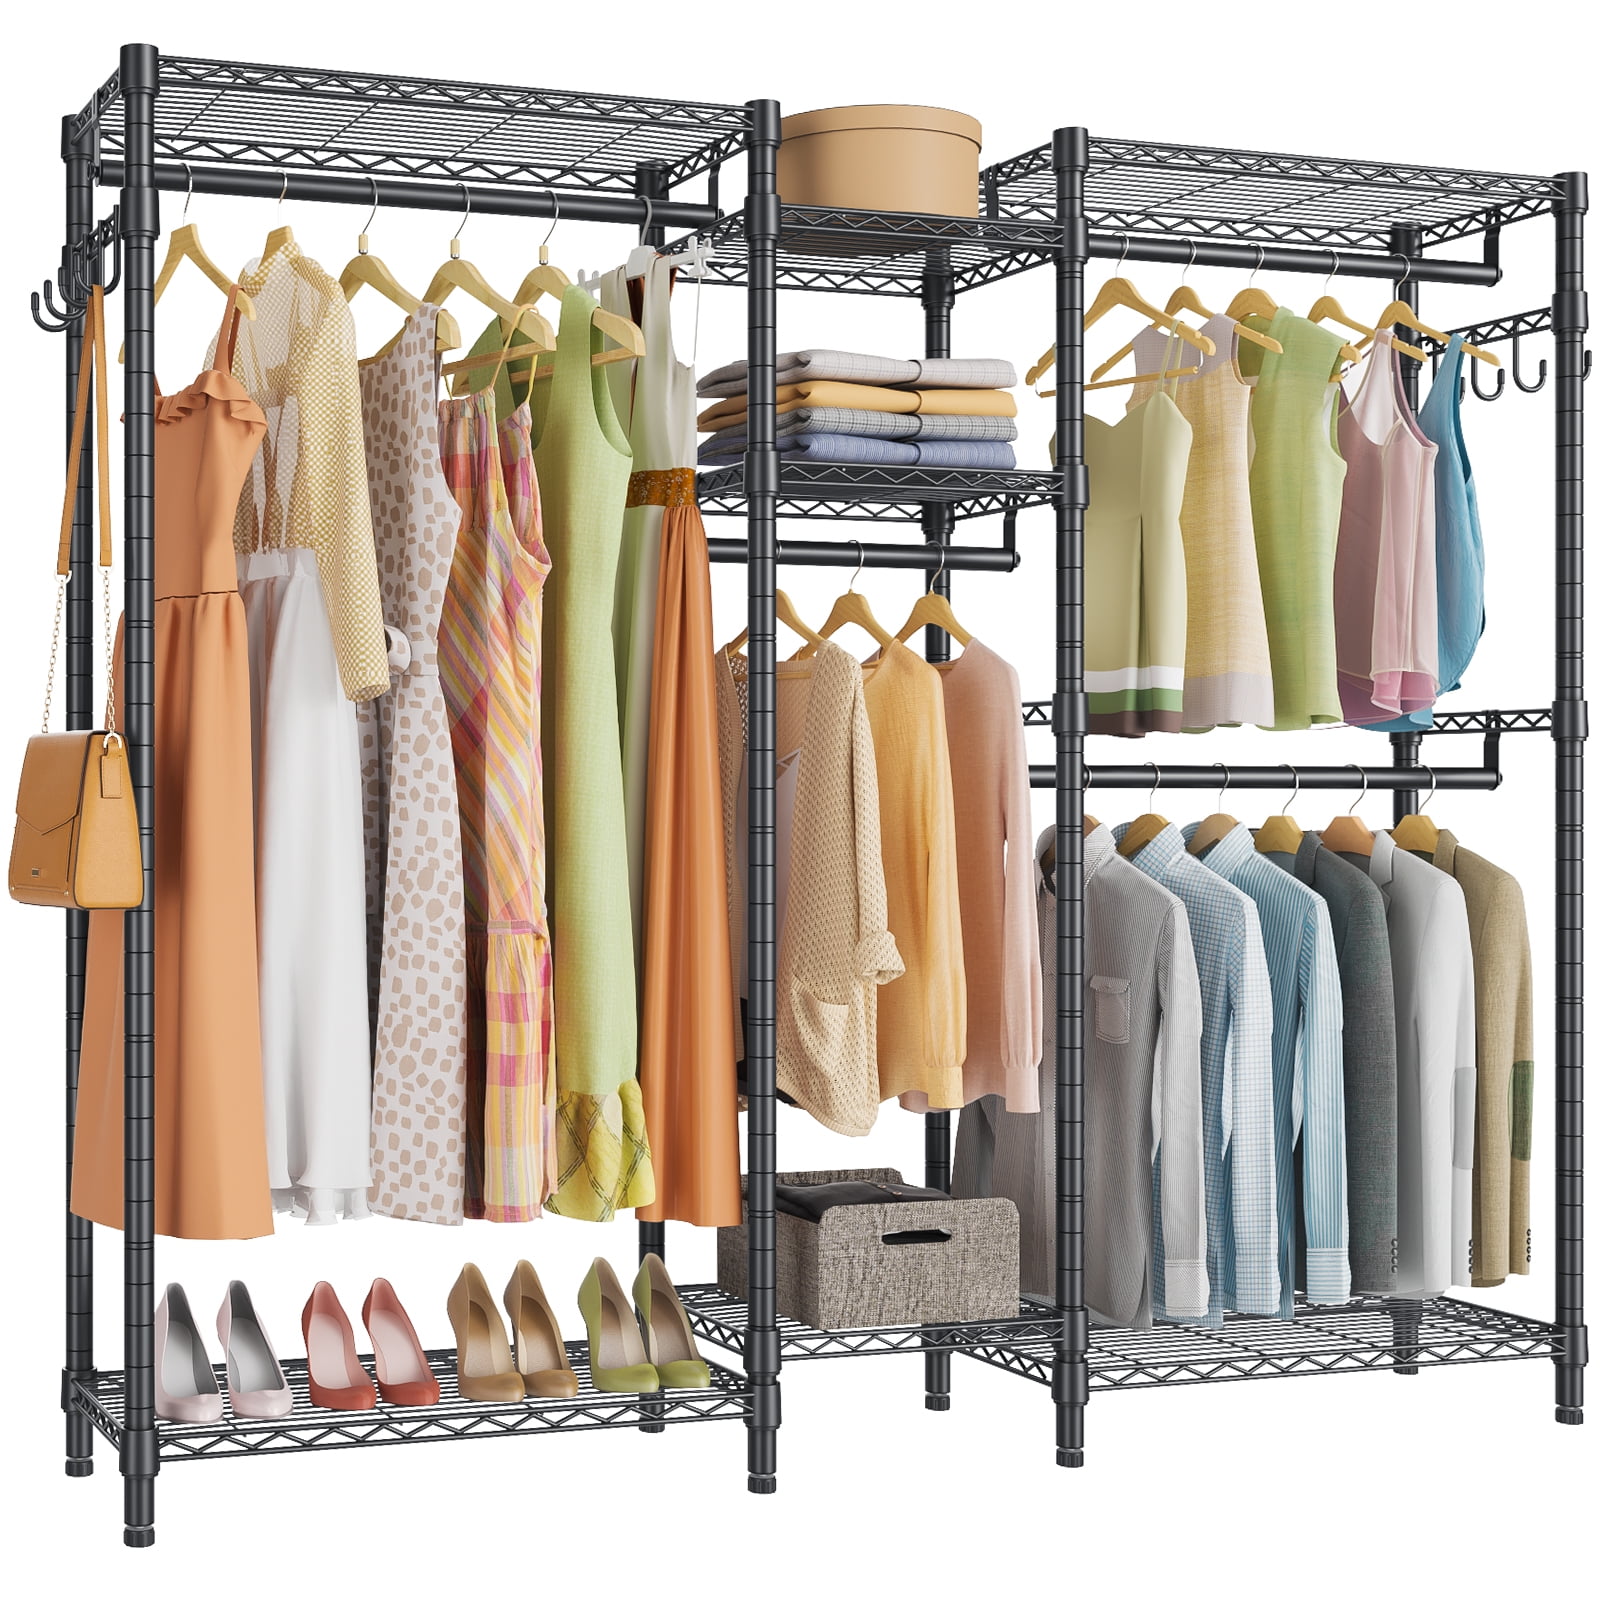 Raybee 800 Lbs Heavy Duty Clothes Rack for Hanging Clothes, Metal, Portable  & Freestanding Closet - White / 75 W x 17.8 D x 77 H